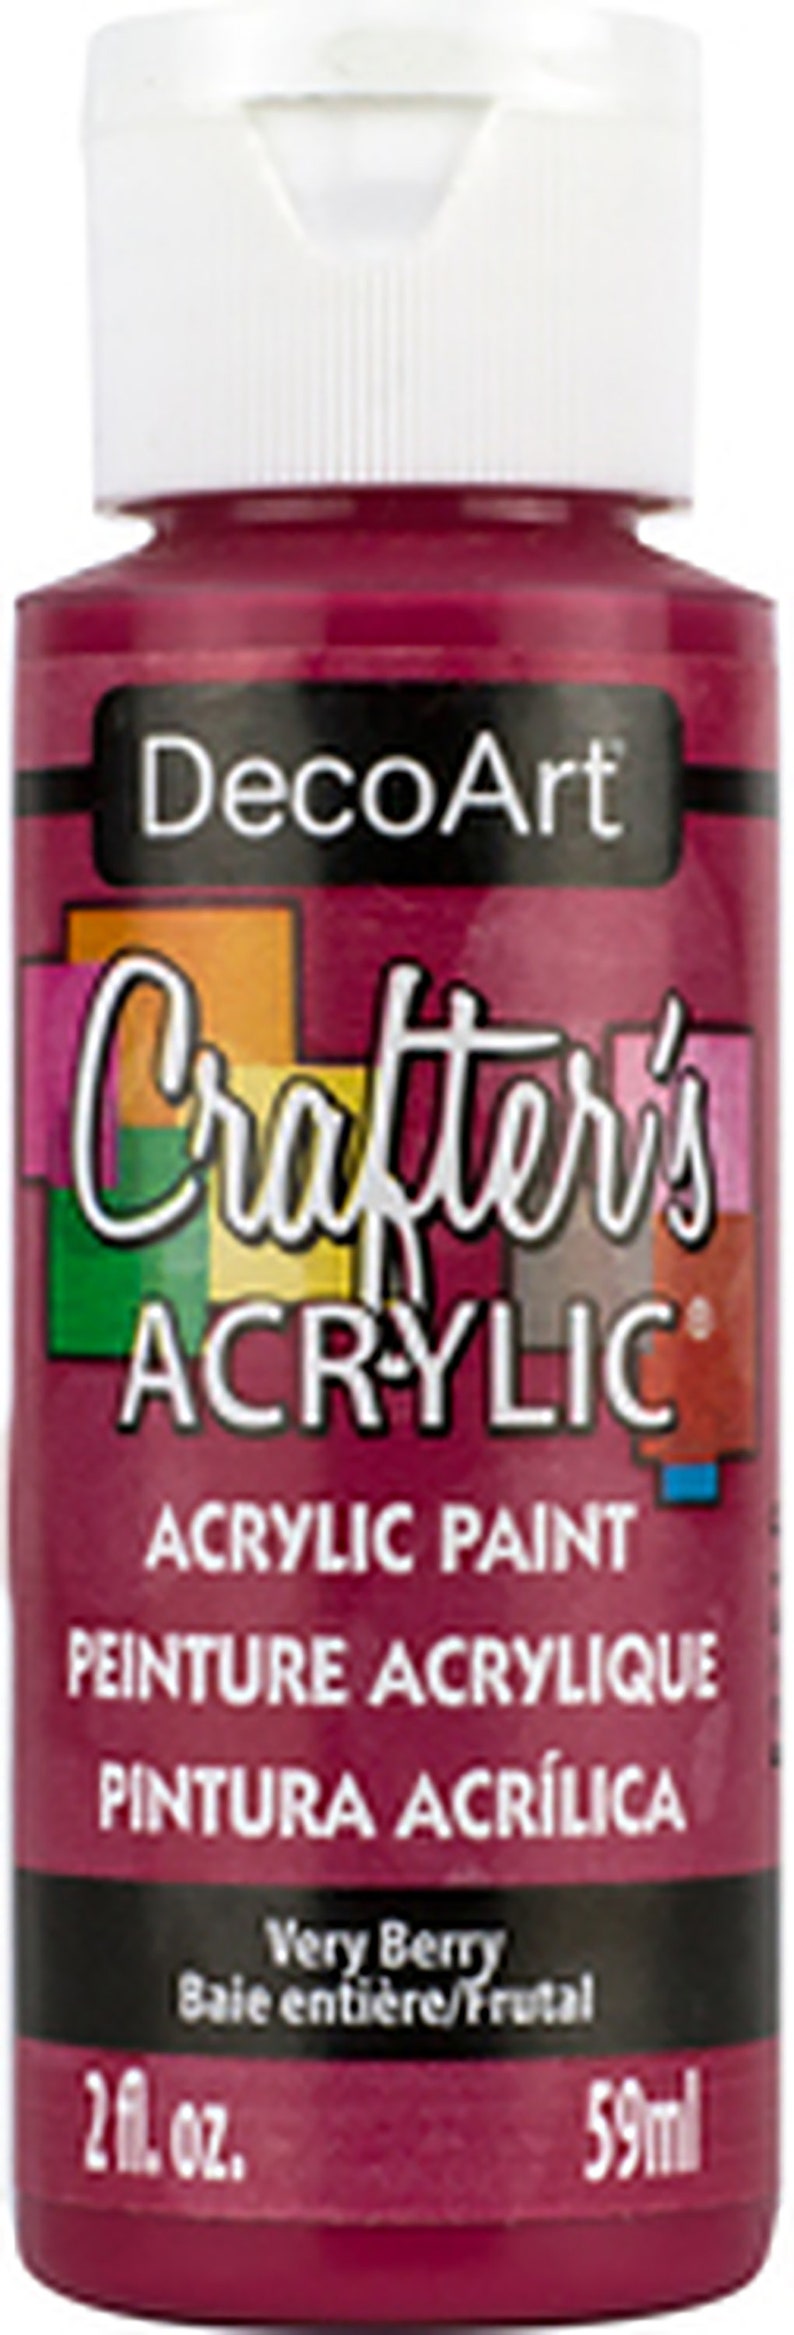 DecoArt Crafters Acrylic Paints Red Tones 59ml 2oz bottles Craft Paints Very Berry DCA121